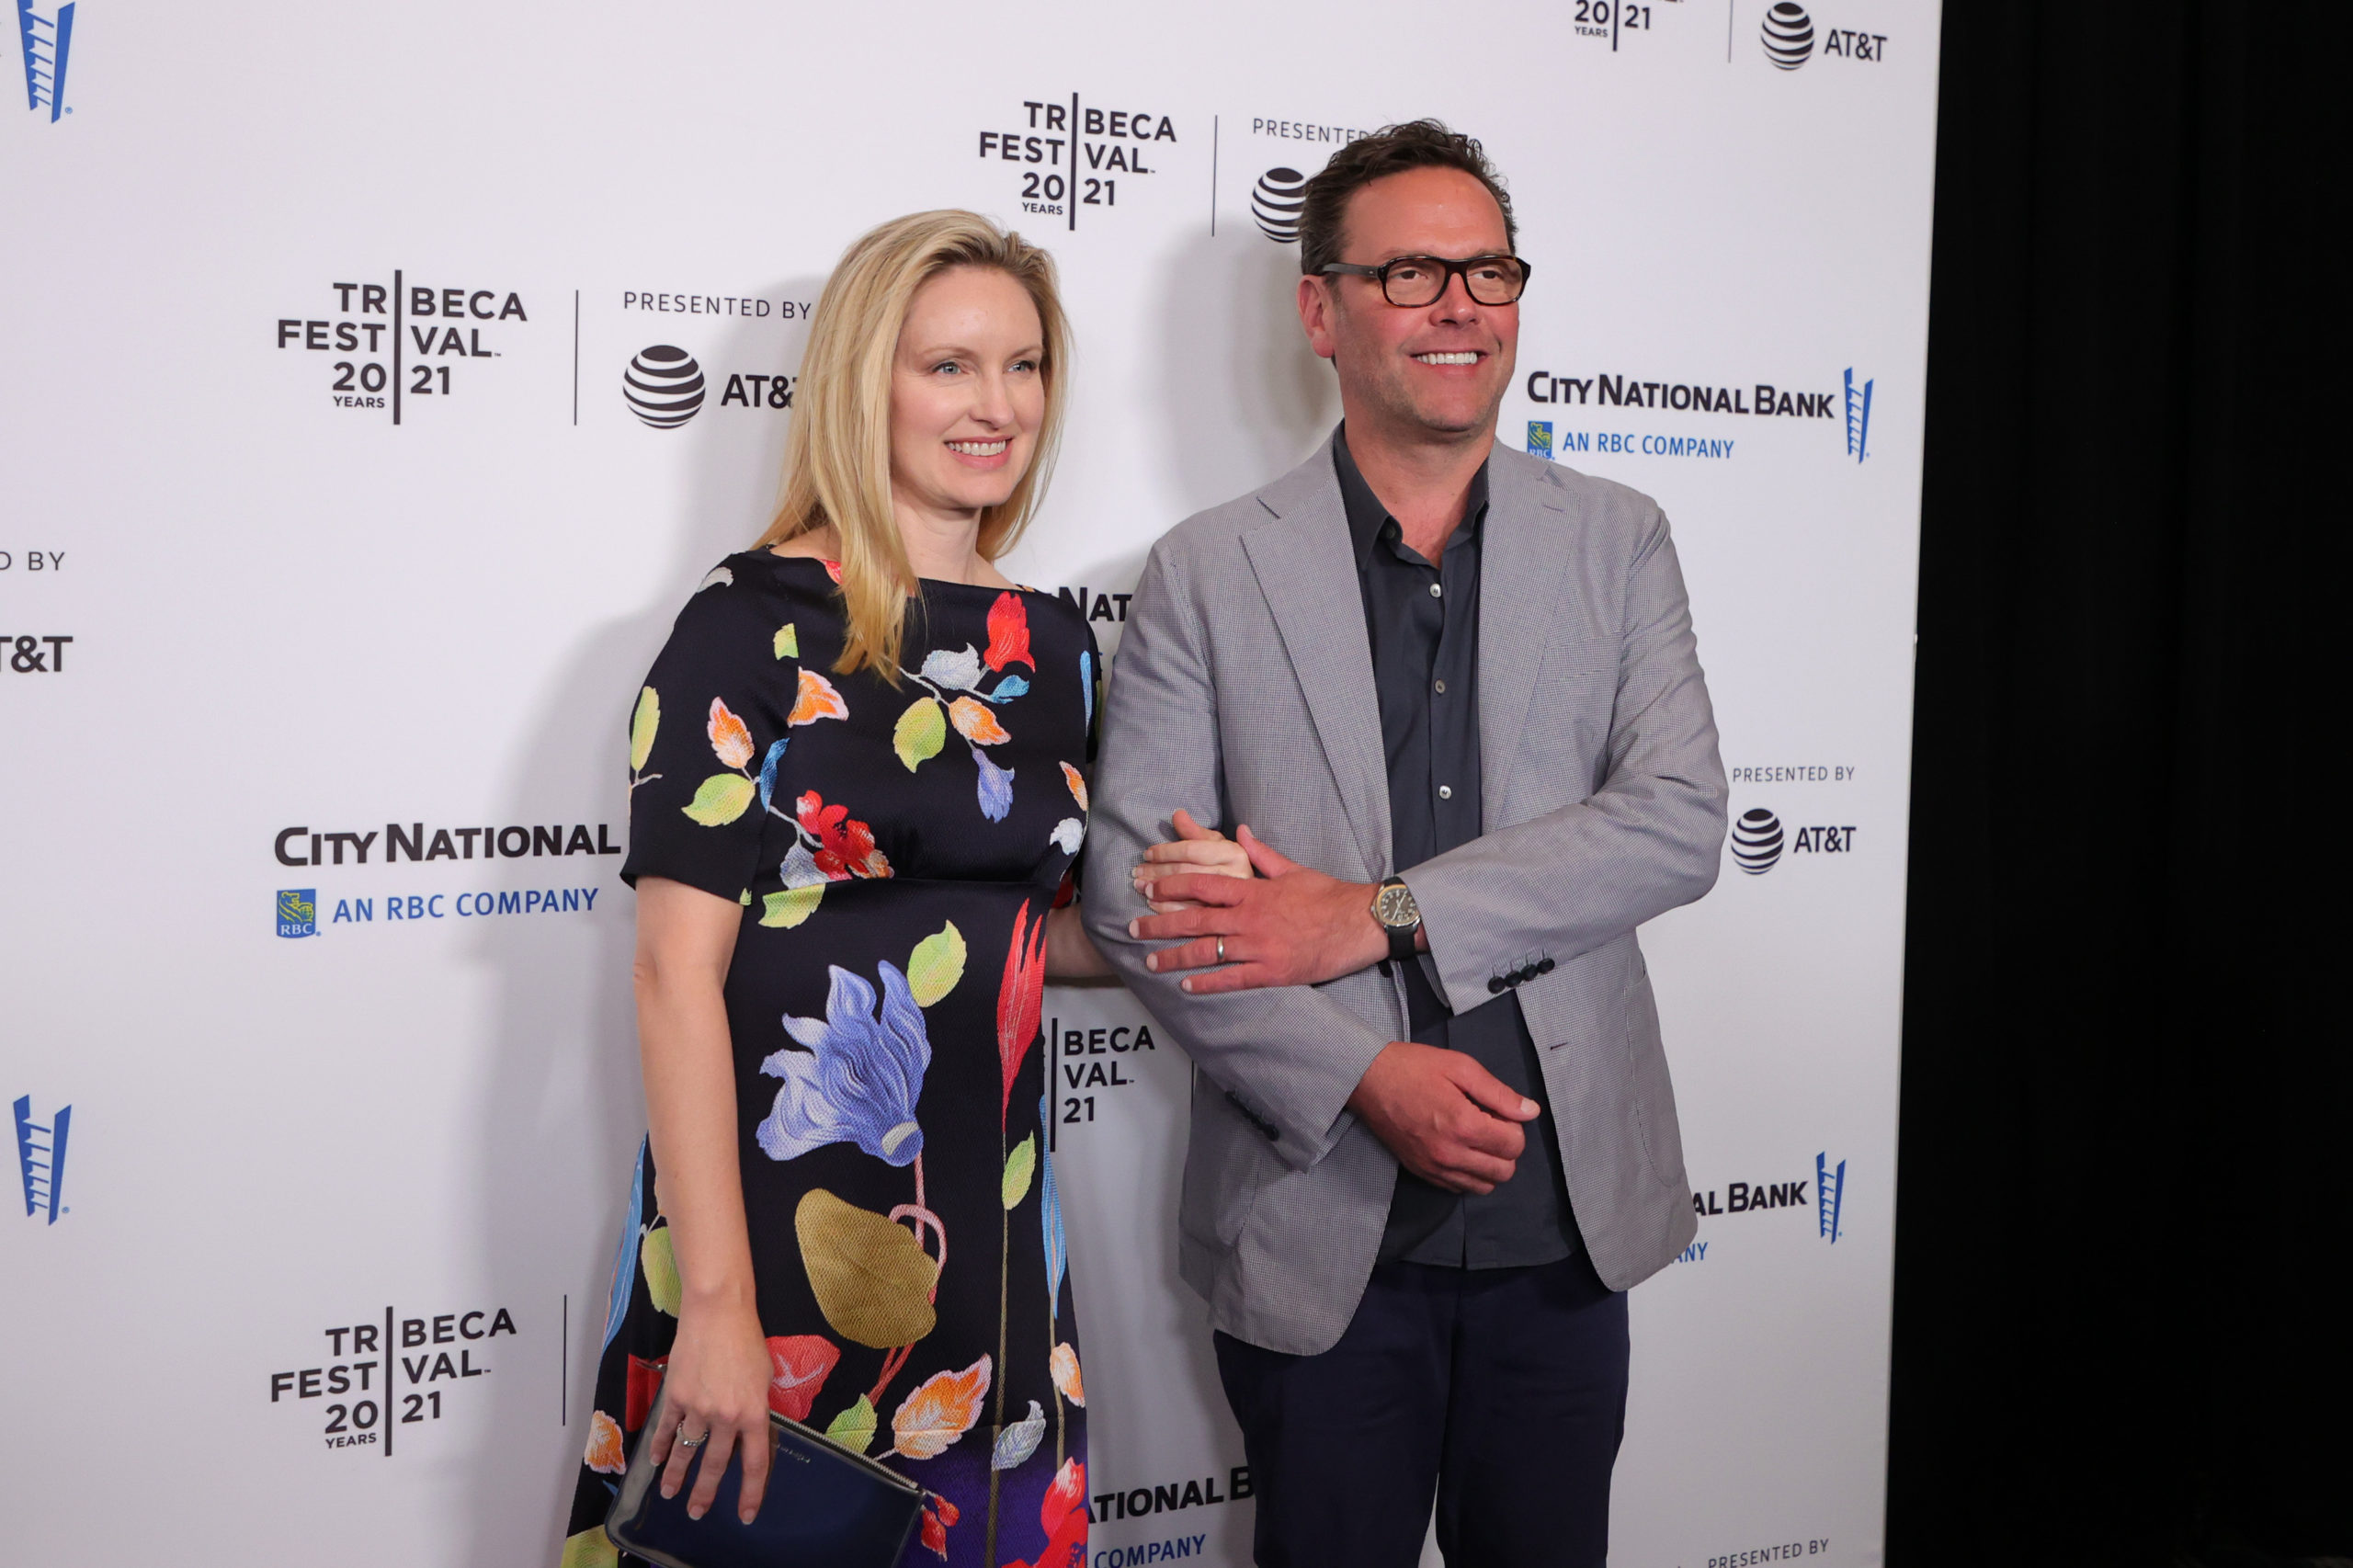 James and Kathryn Murdoch attend a film premier during the 2021 Tribeca Festival on June 19 in New York City. (Mike Coppola/Getty Images for Tribeca Festival)